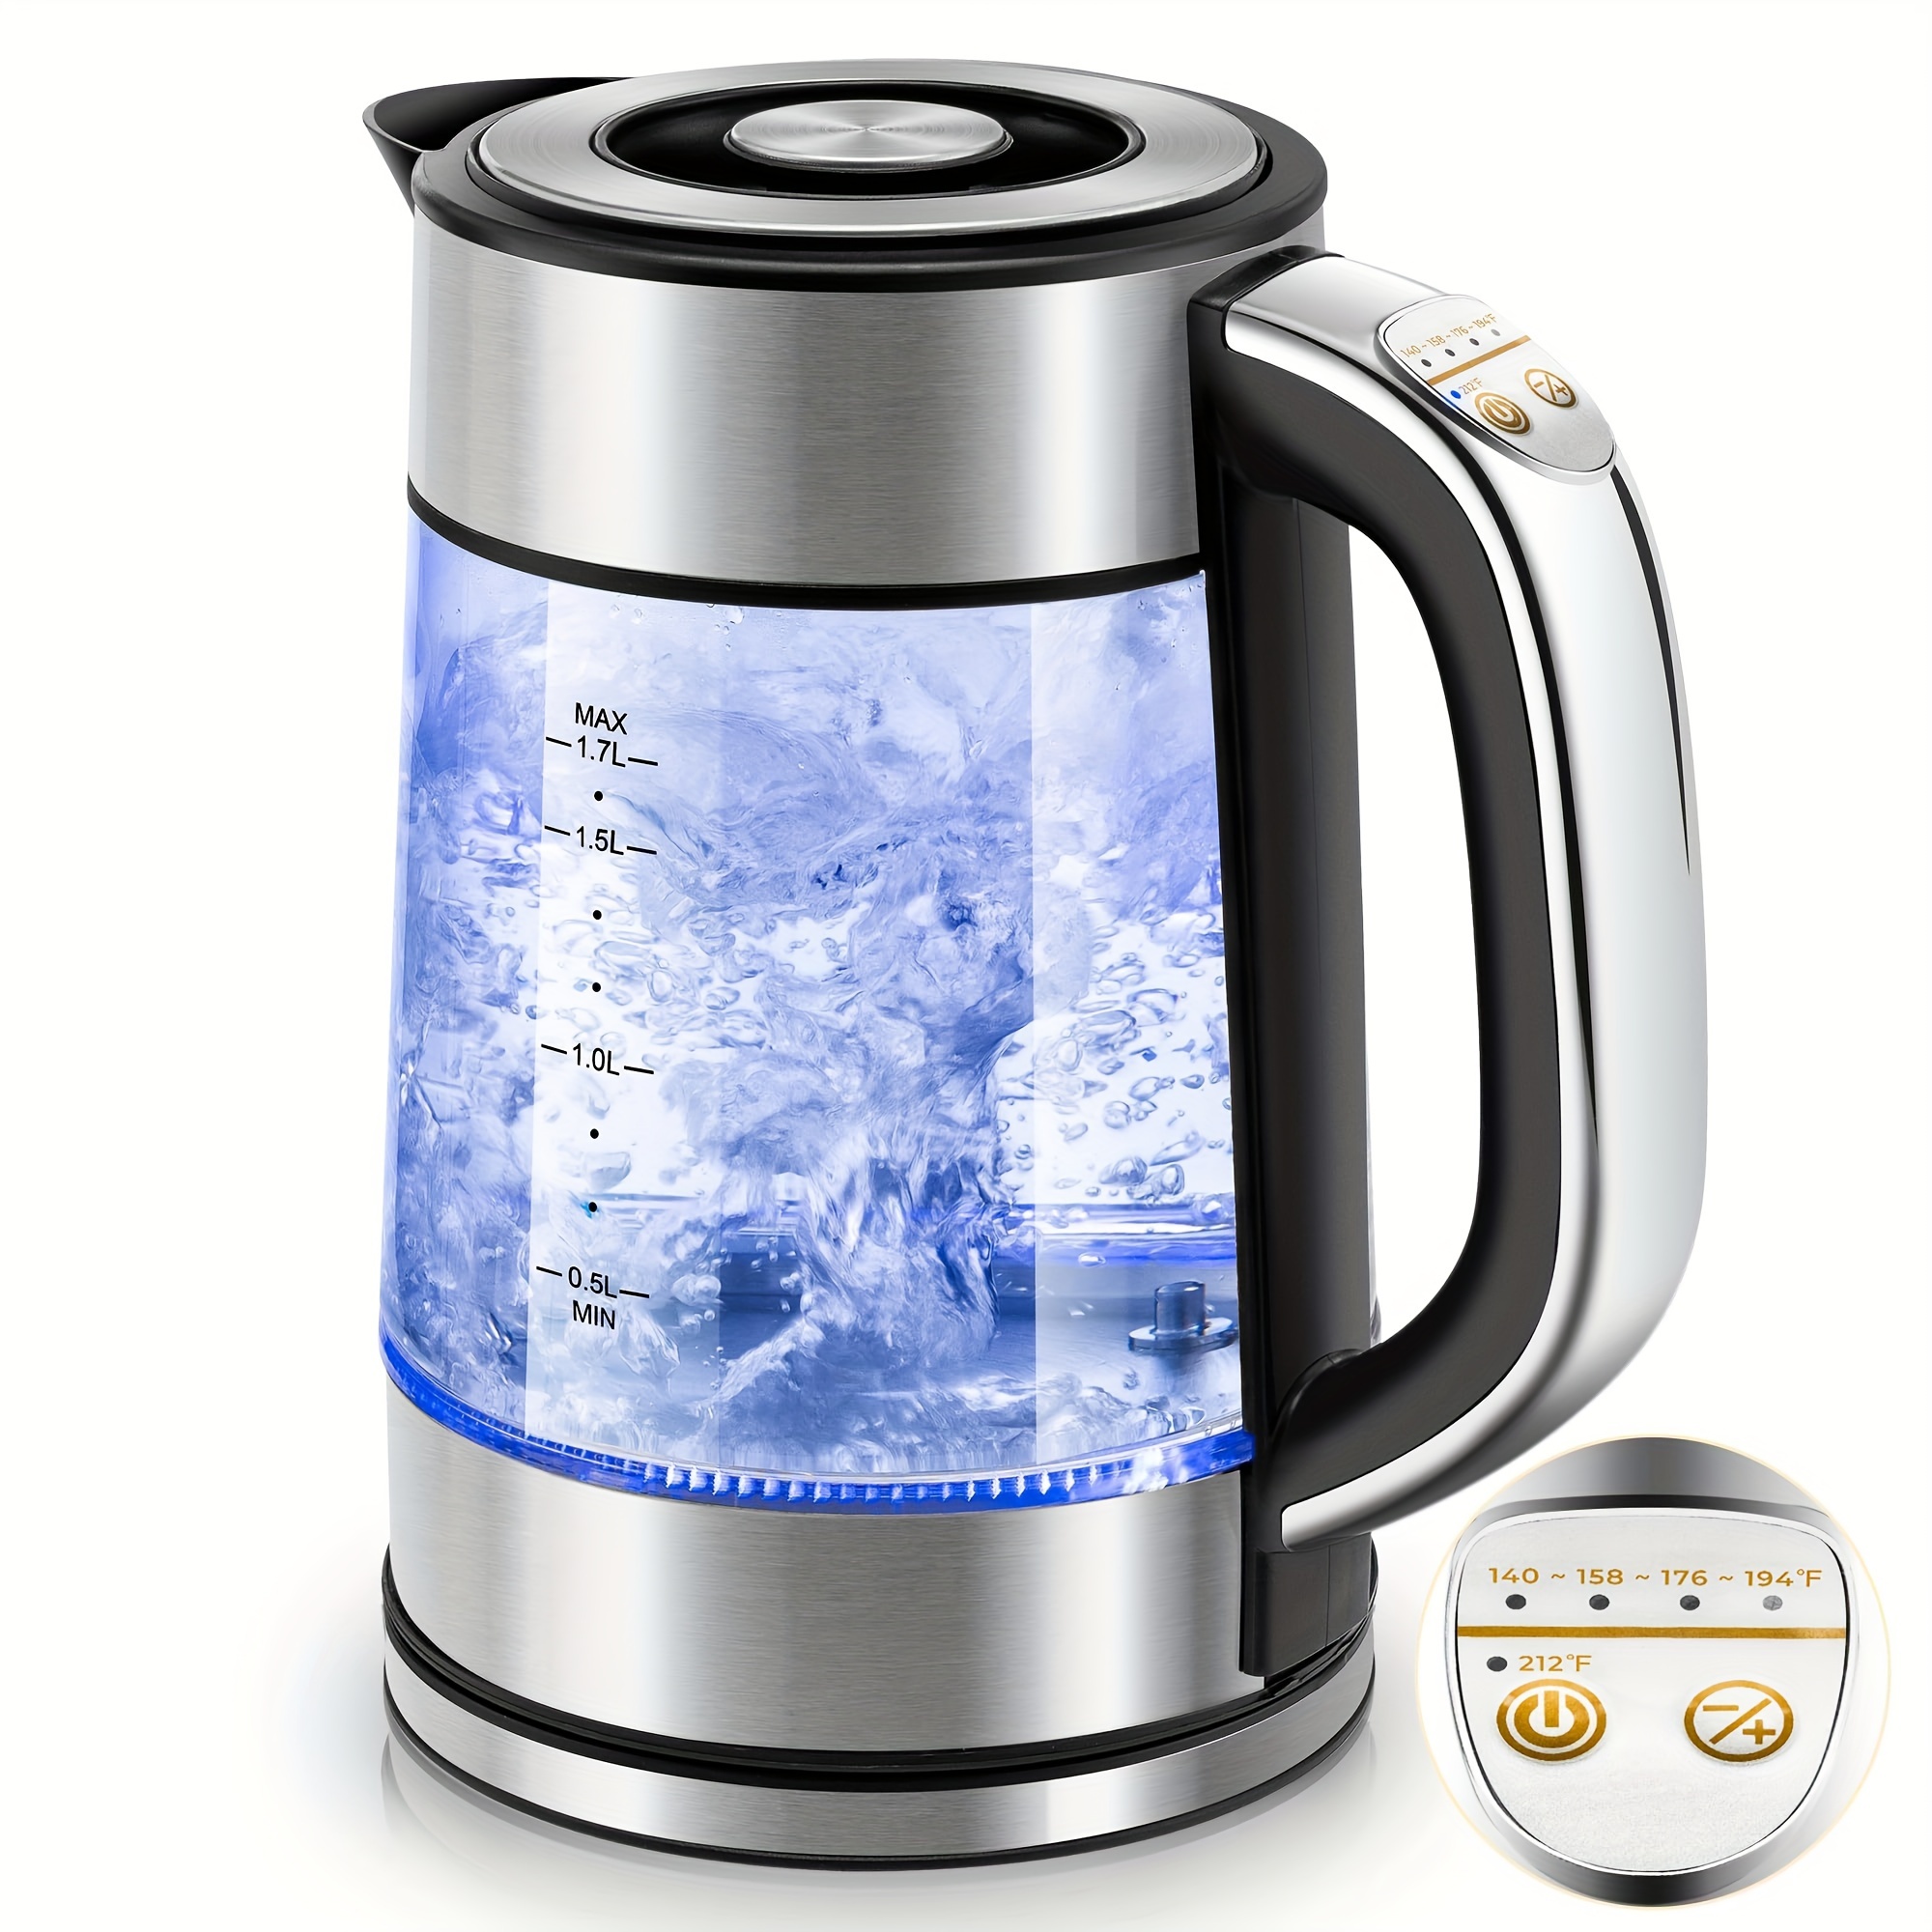 

1pc Electric Kettle Temperature Control With 4 Presets, Keep Warm 1.7l Electric Tea Kettle & Hot Water Boiler, Auto-off & Boil-dry Protection, Bpa Free